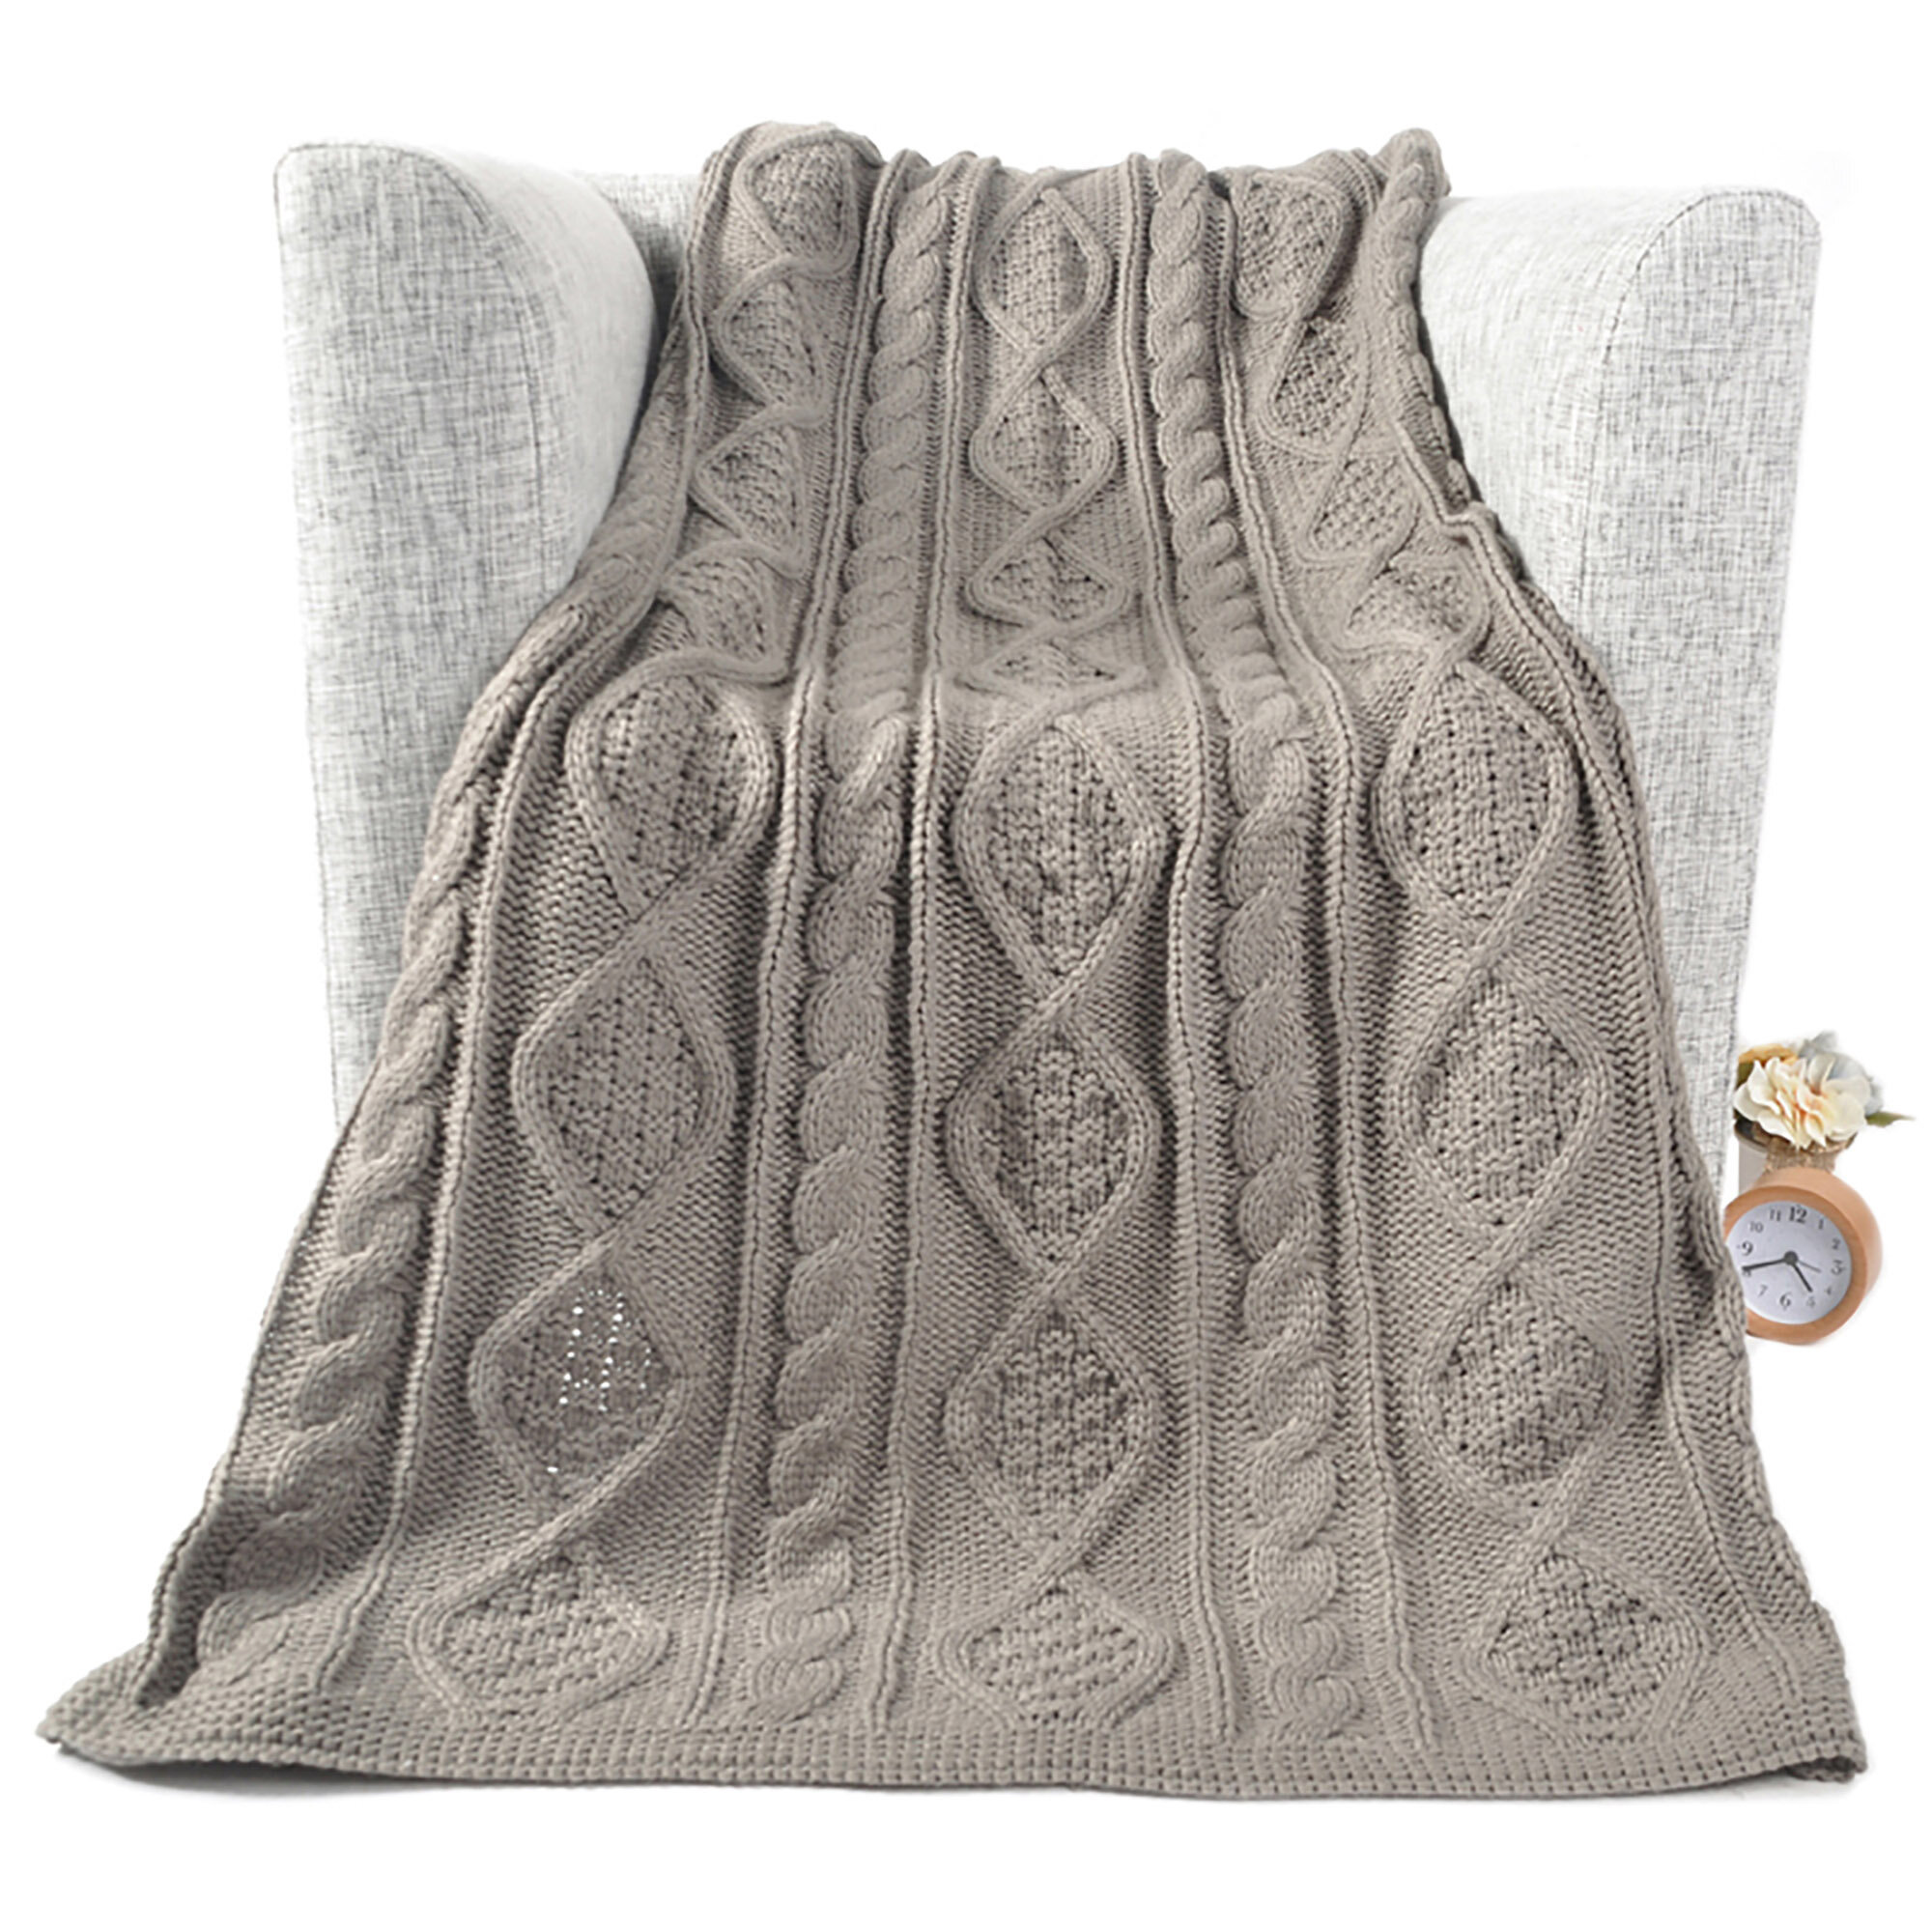 Gracie Oaks Battilo Cable Knit Throw Blanket For Couch Sofa Chair Home Decorative